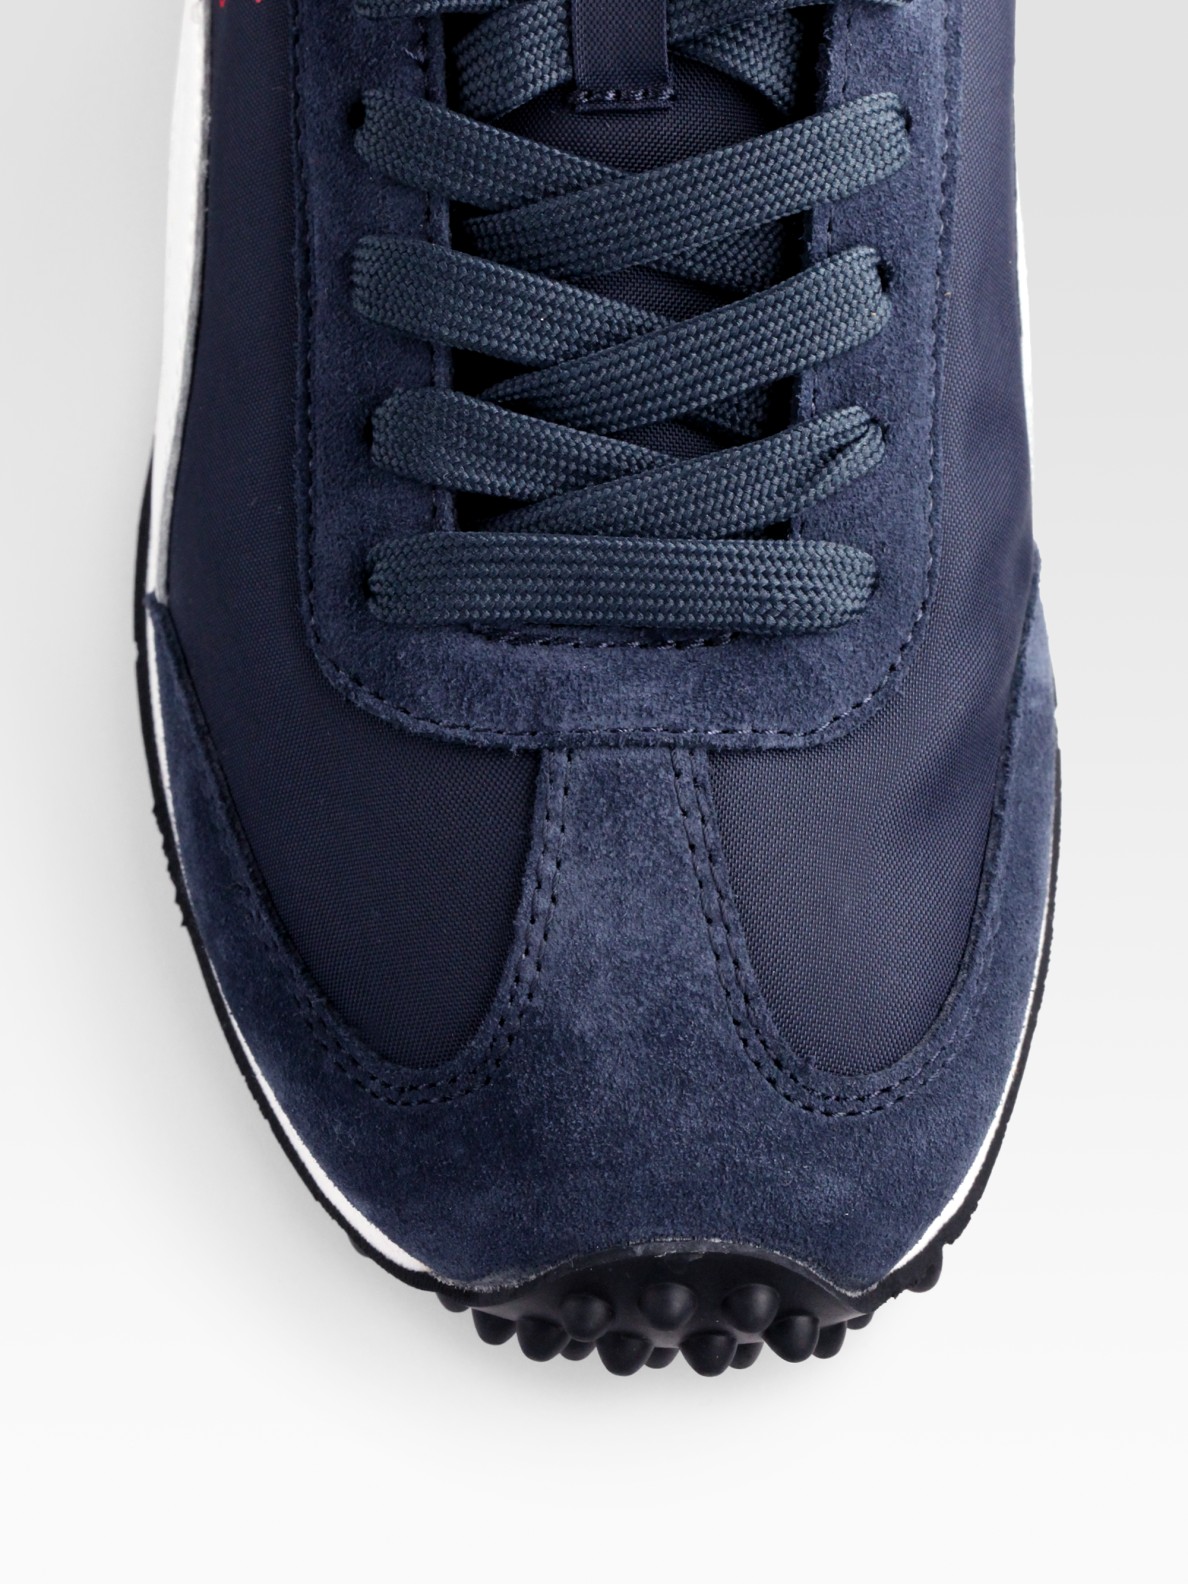 PUMA Whirlwind Classic Sneakers in Navy (Blue) for Men - Lyst